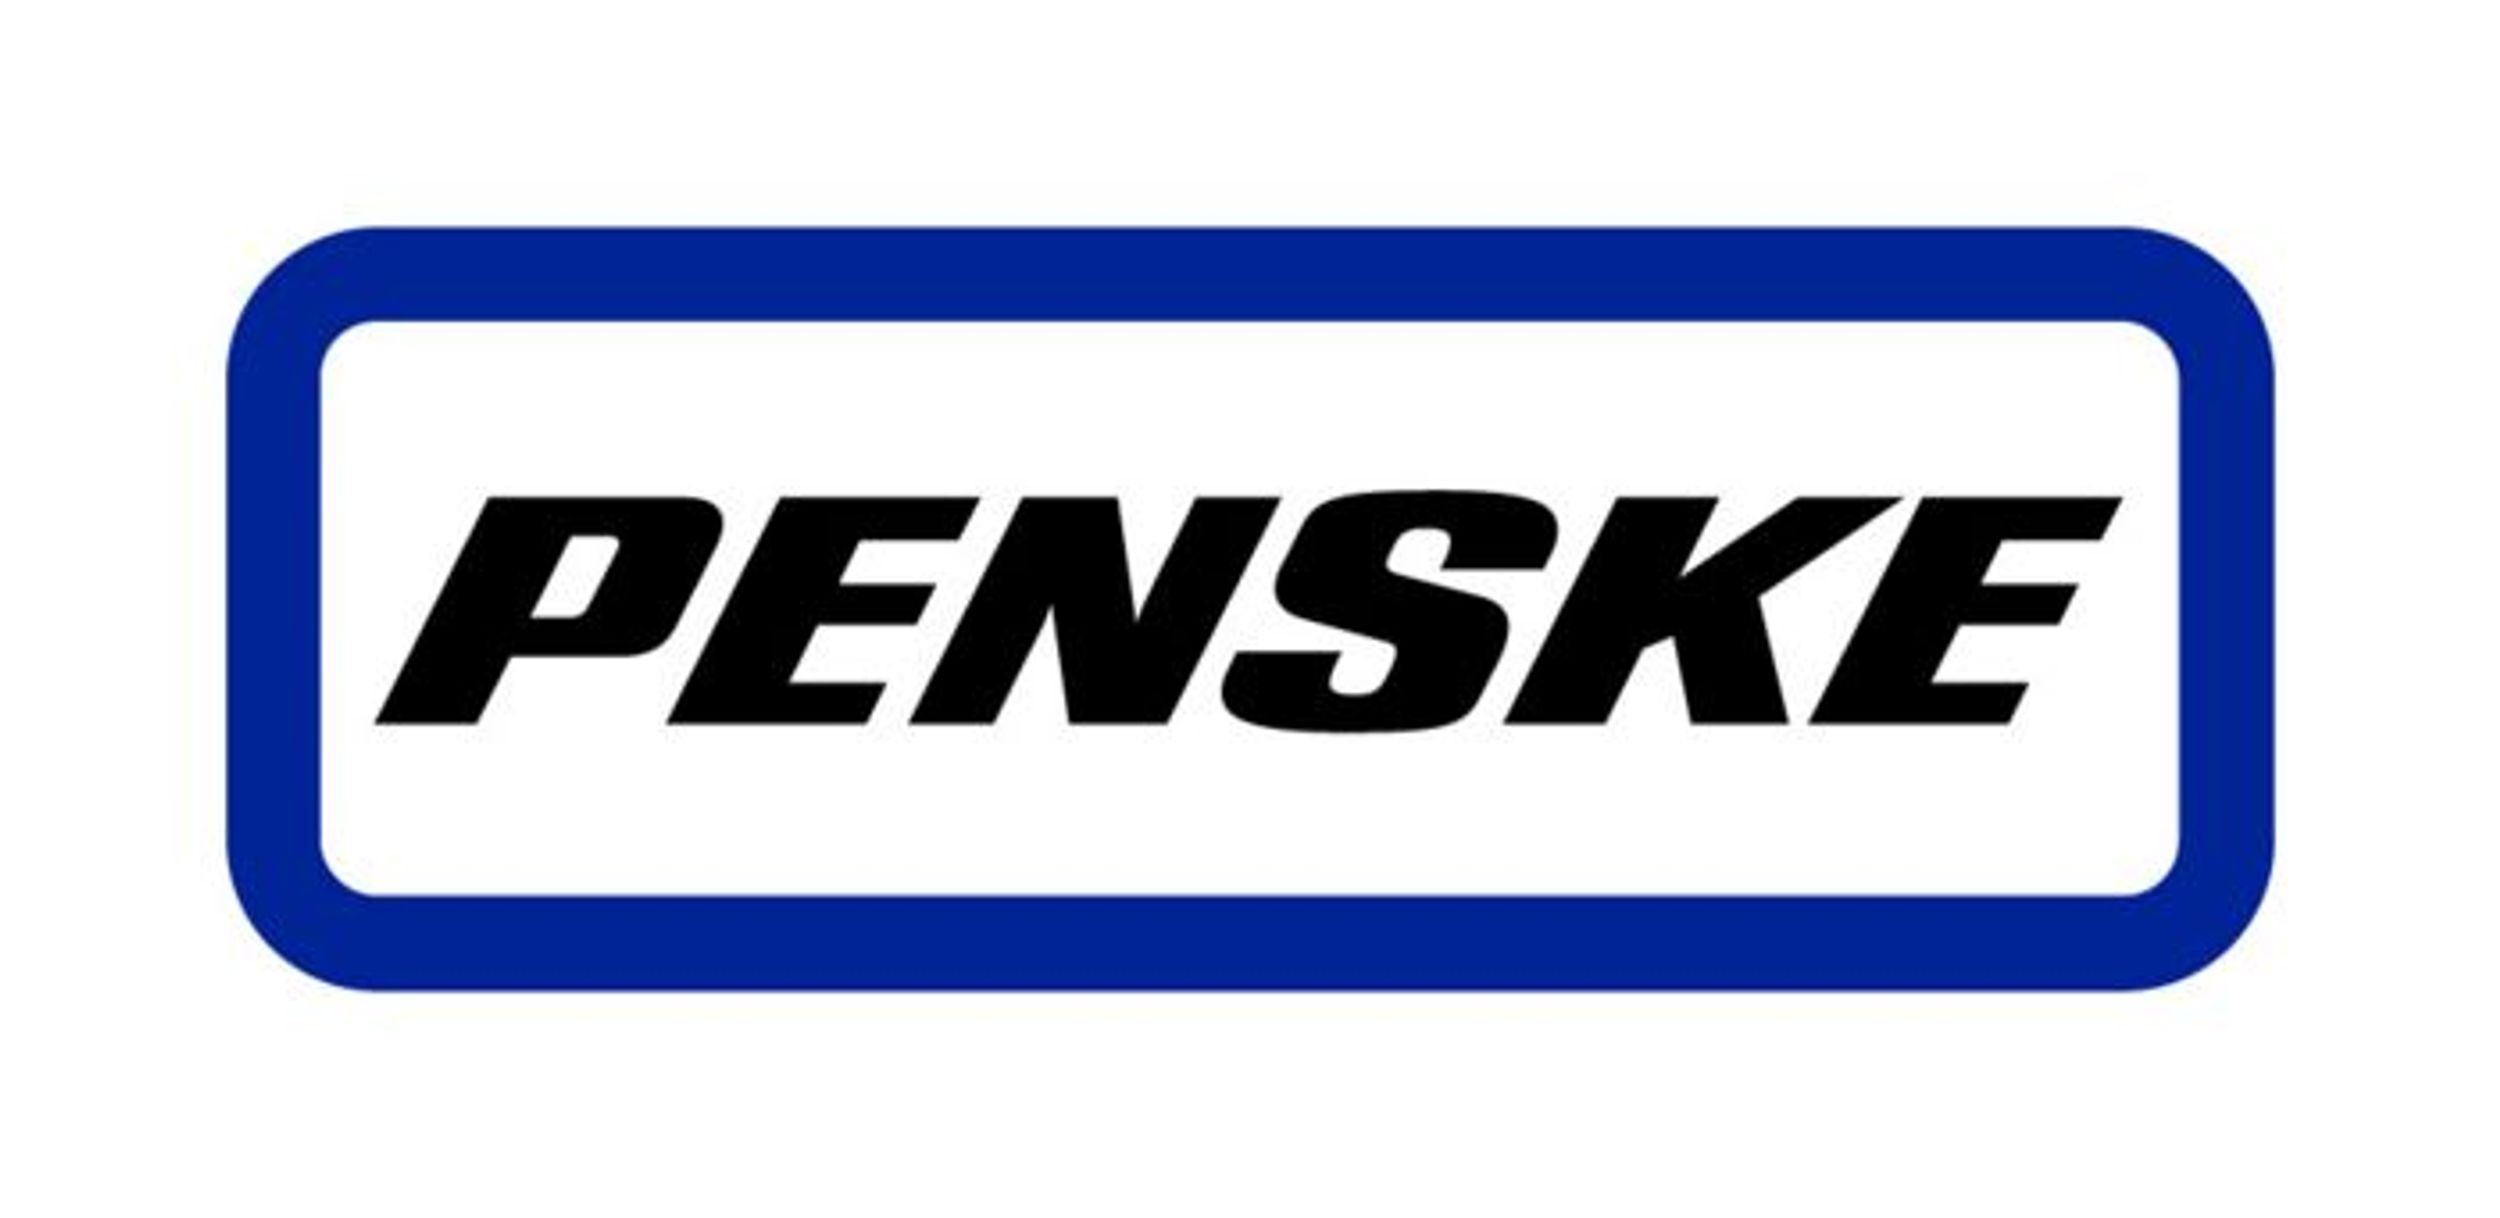 Penske Offering Latest Vehicles With Advanced Technology